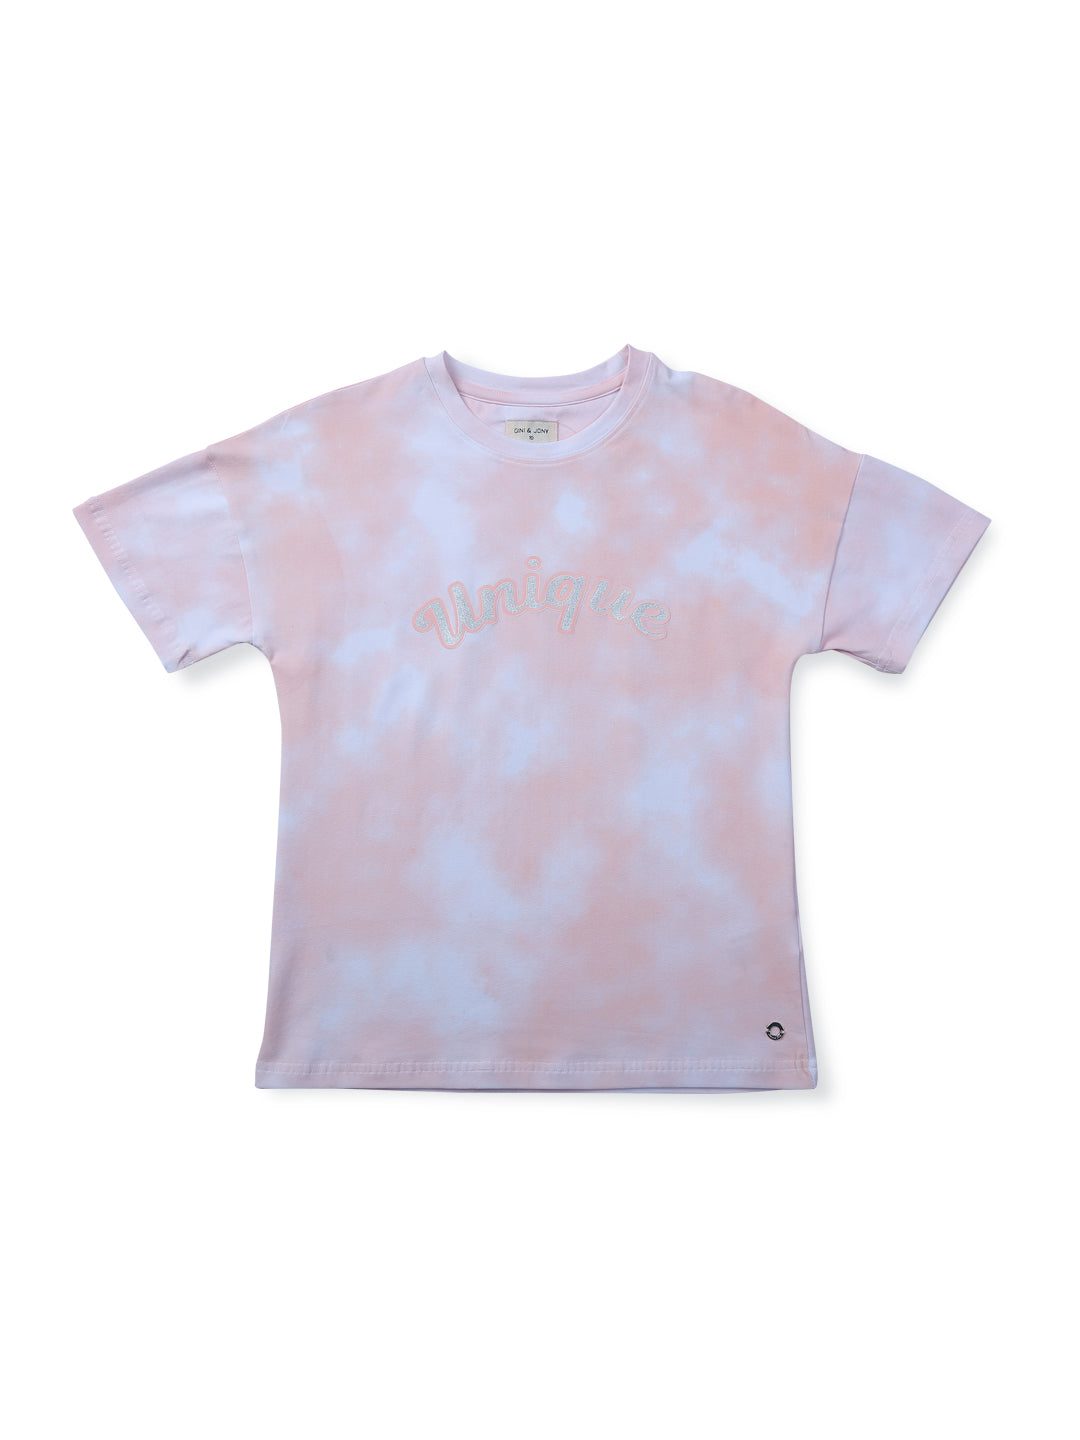 Girls Pink Cotton Tie and Dye Knits Top